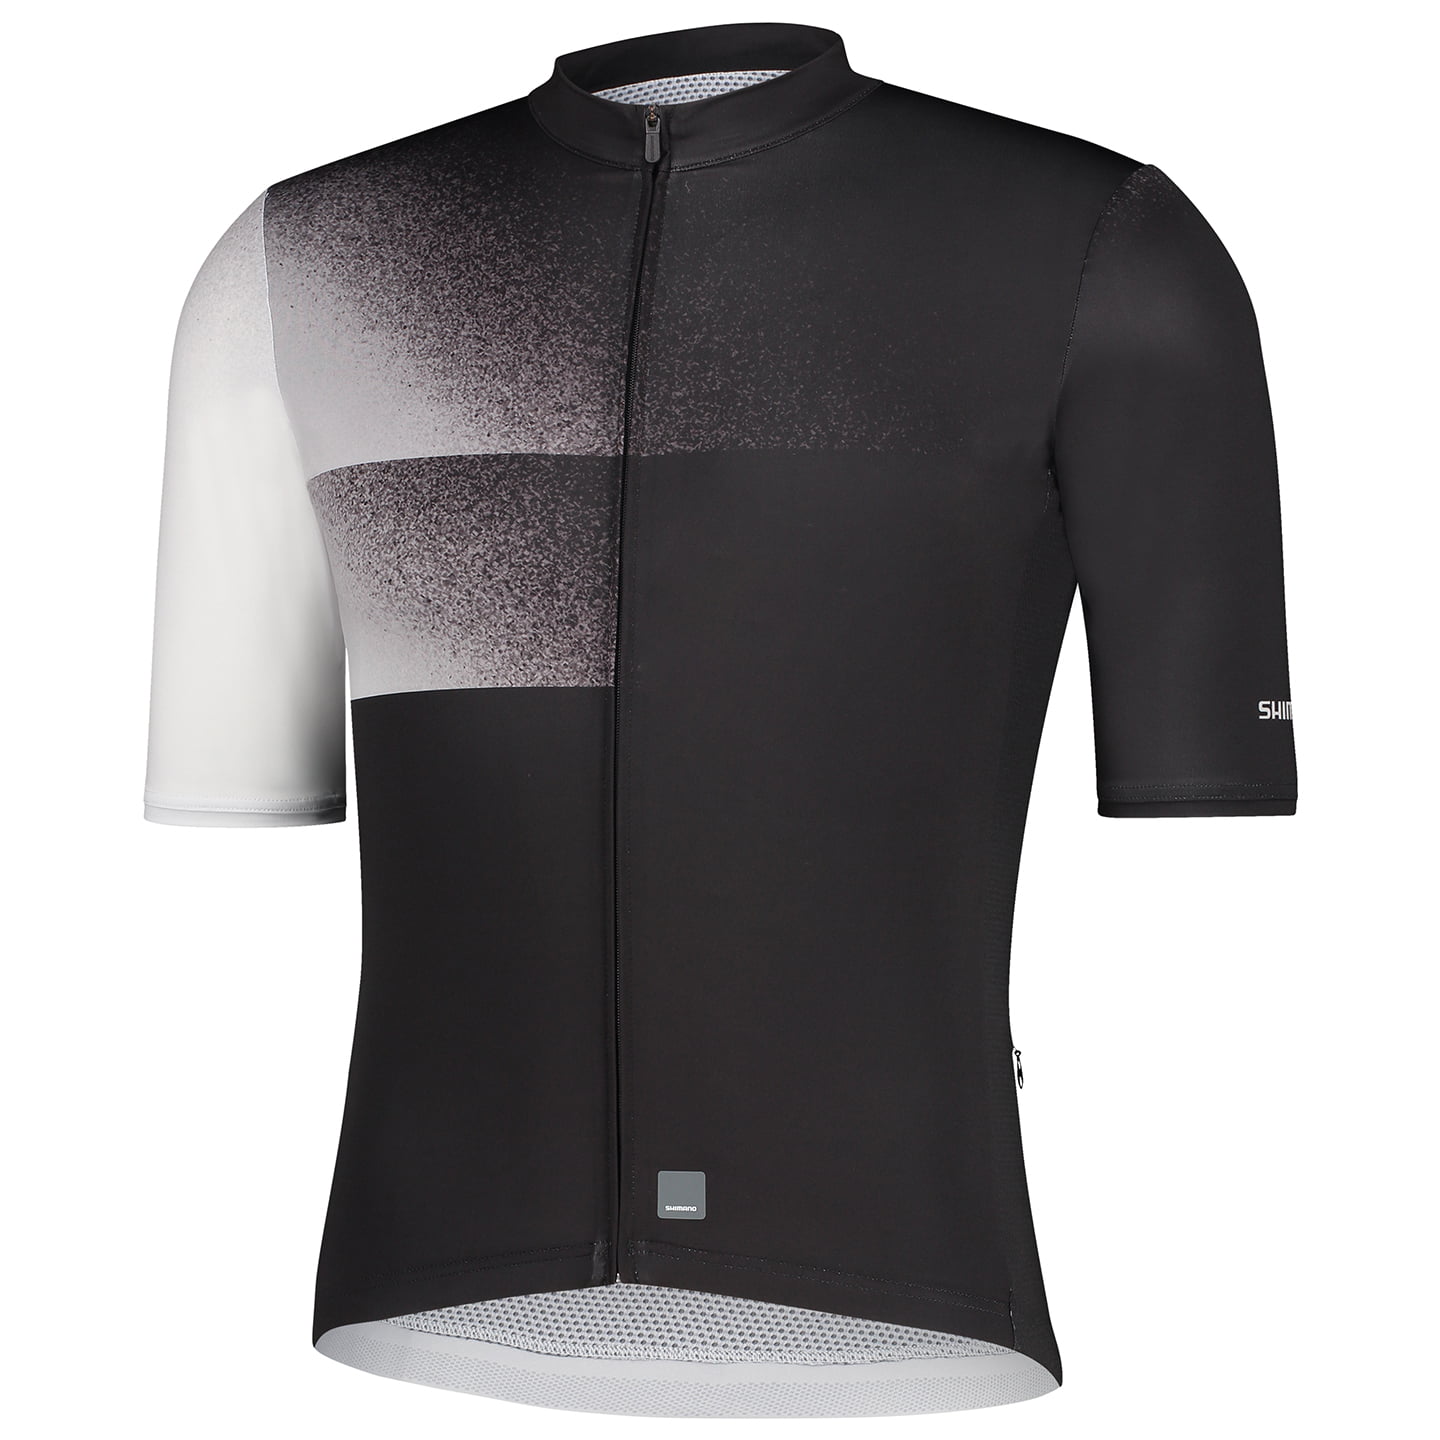 SHIMANO Breakaway Short Sleeve Jersey Short Sleeve Jersey, for men, size 2XL, Cycling jersey, Cycle clothing